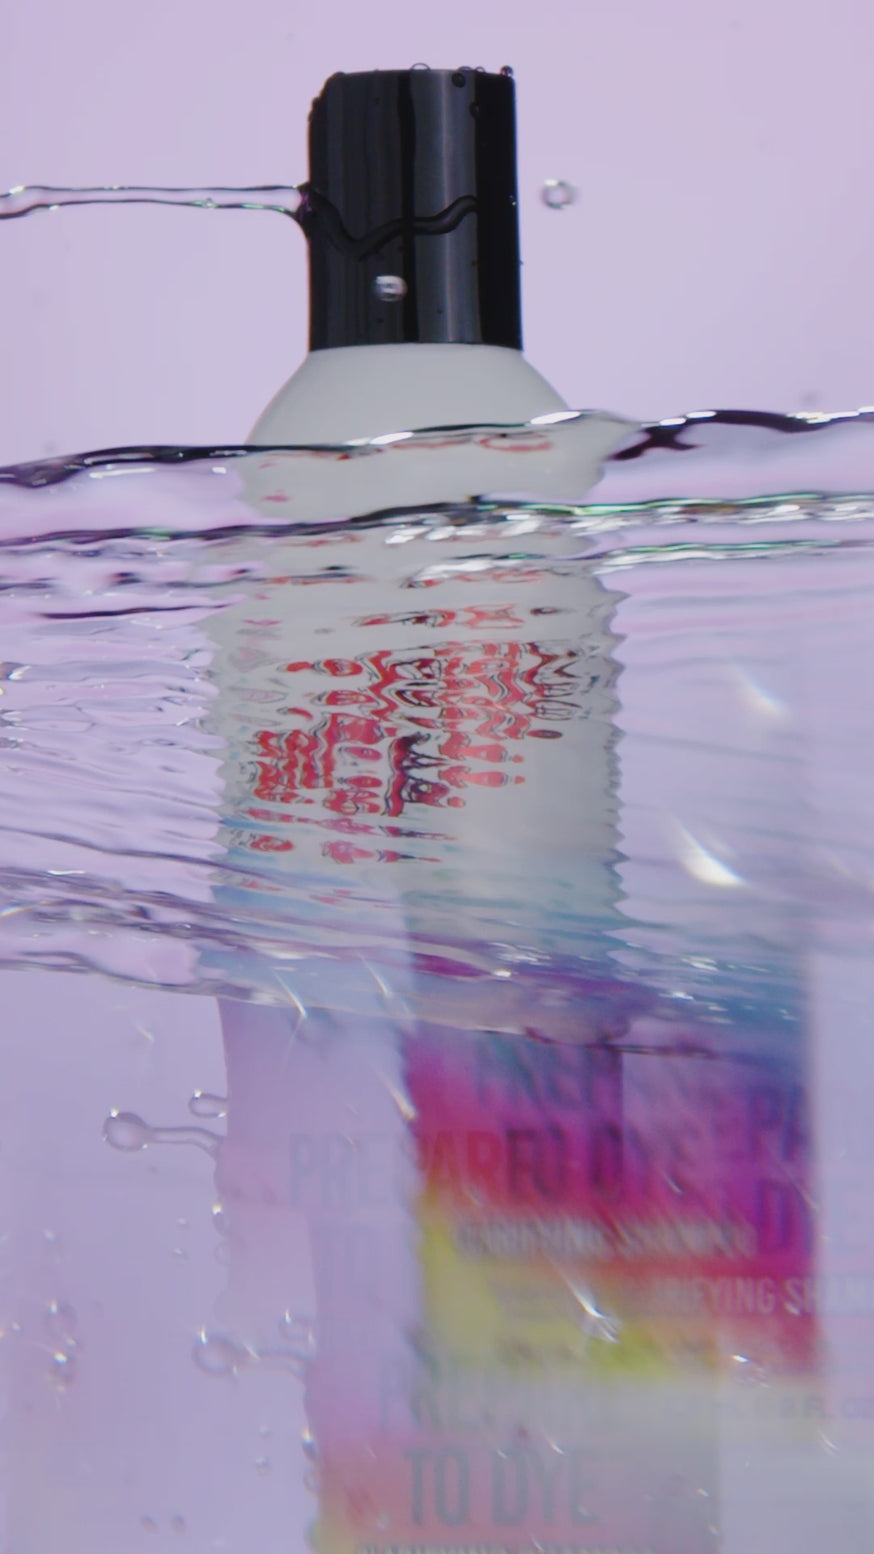 Water streaming over a bottle of Prepare to Dye Shampoo from the Manic Panic Hair Care line.